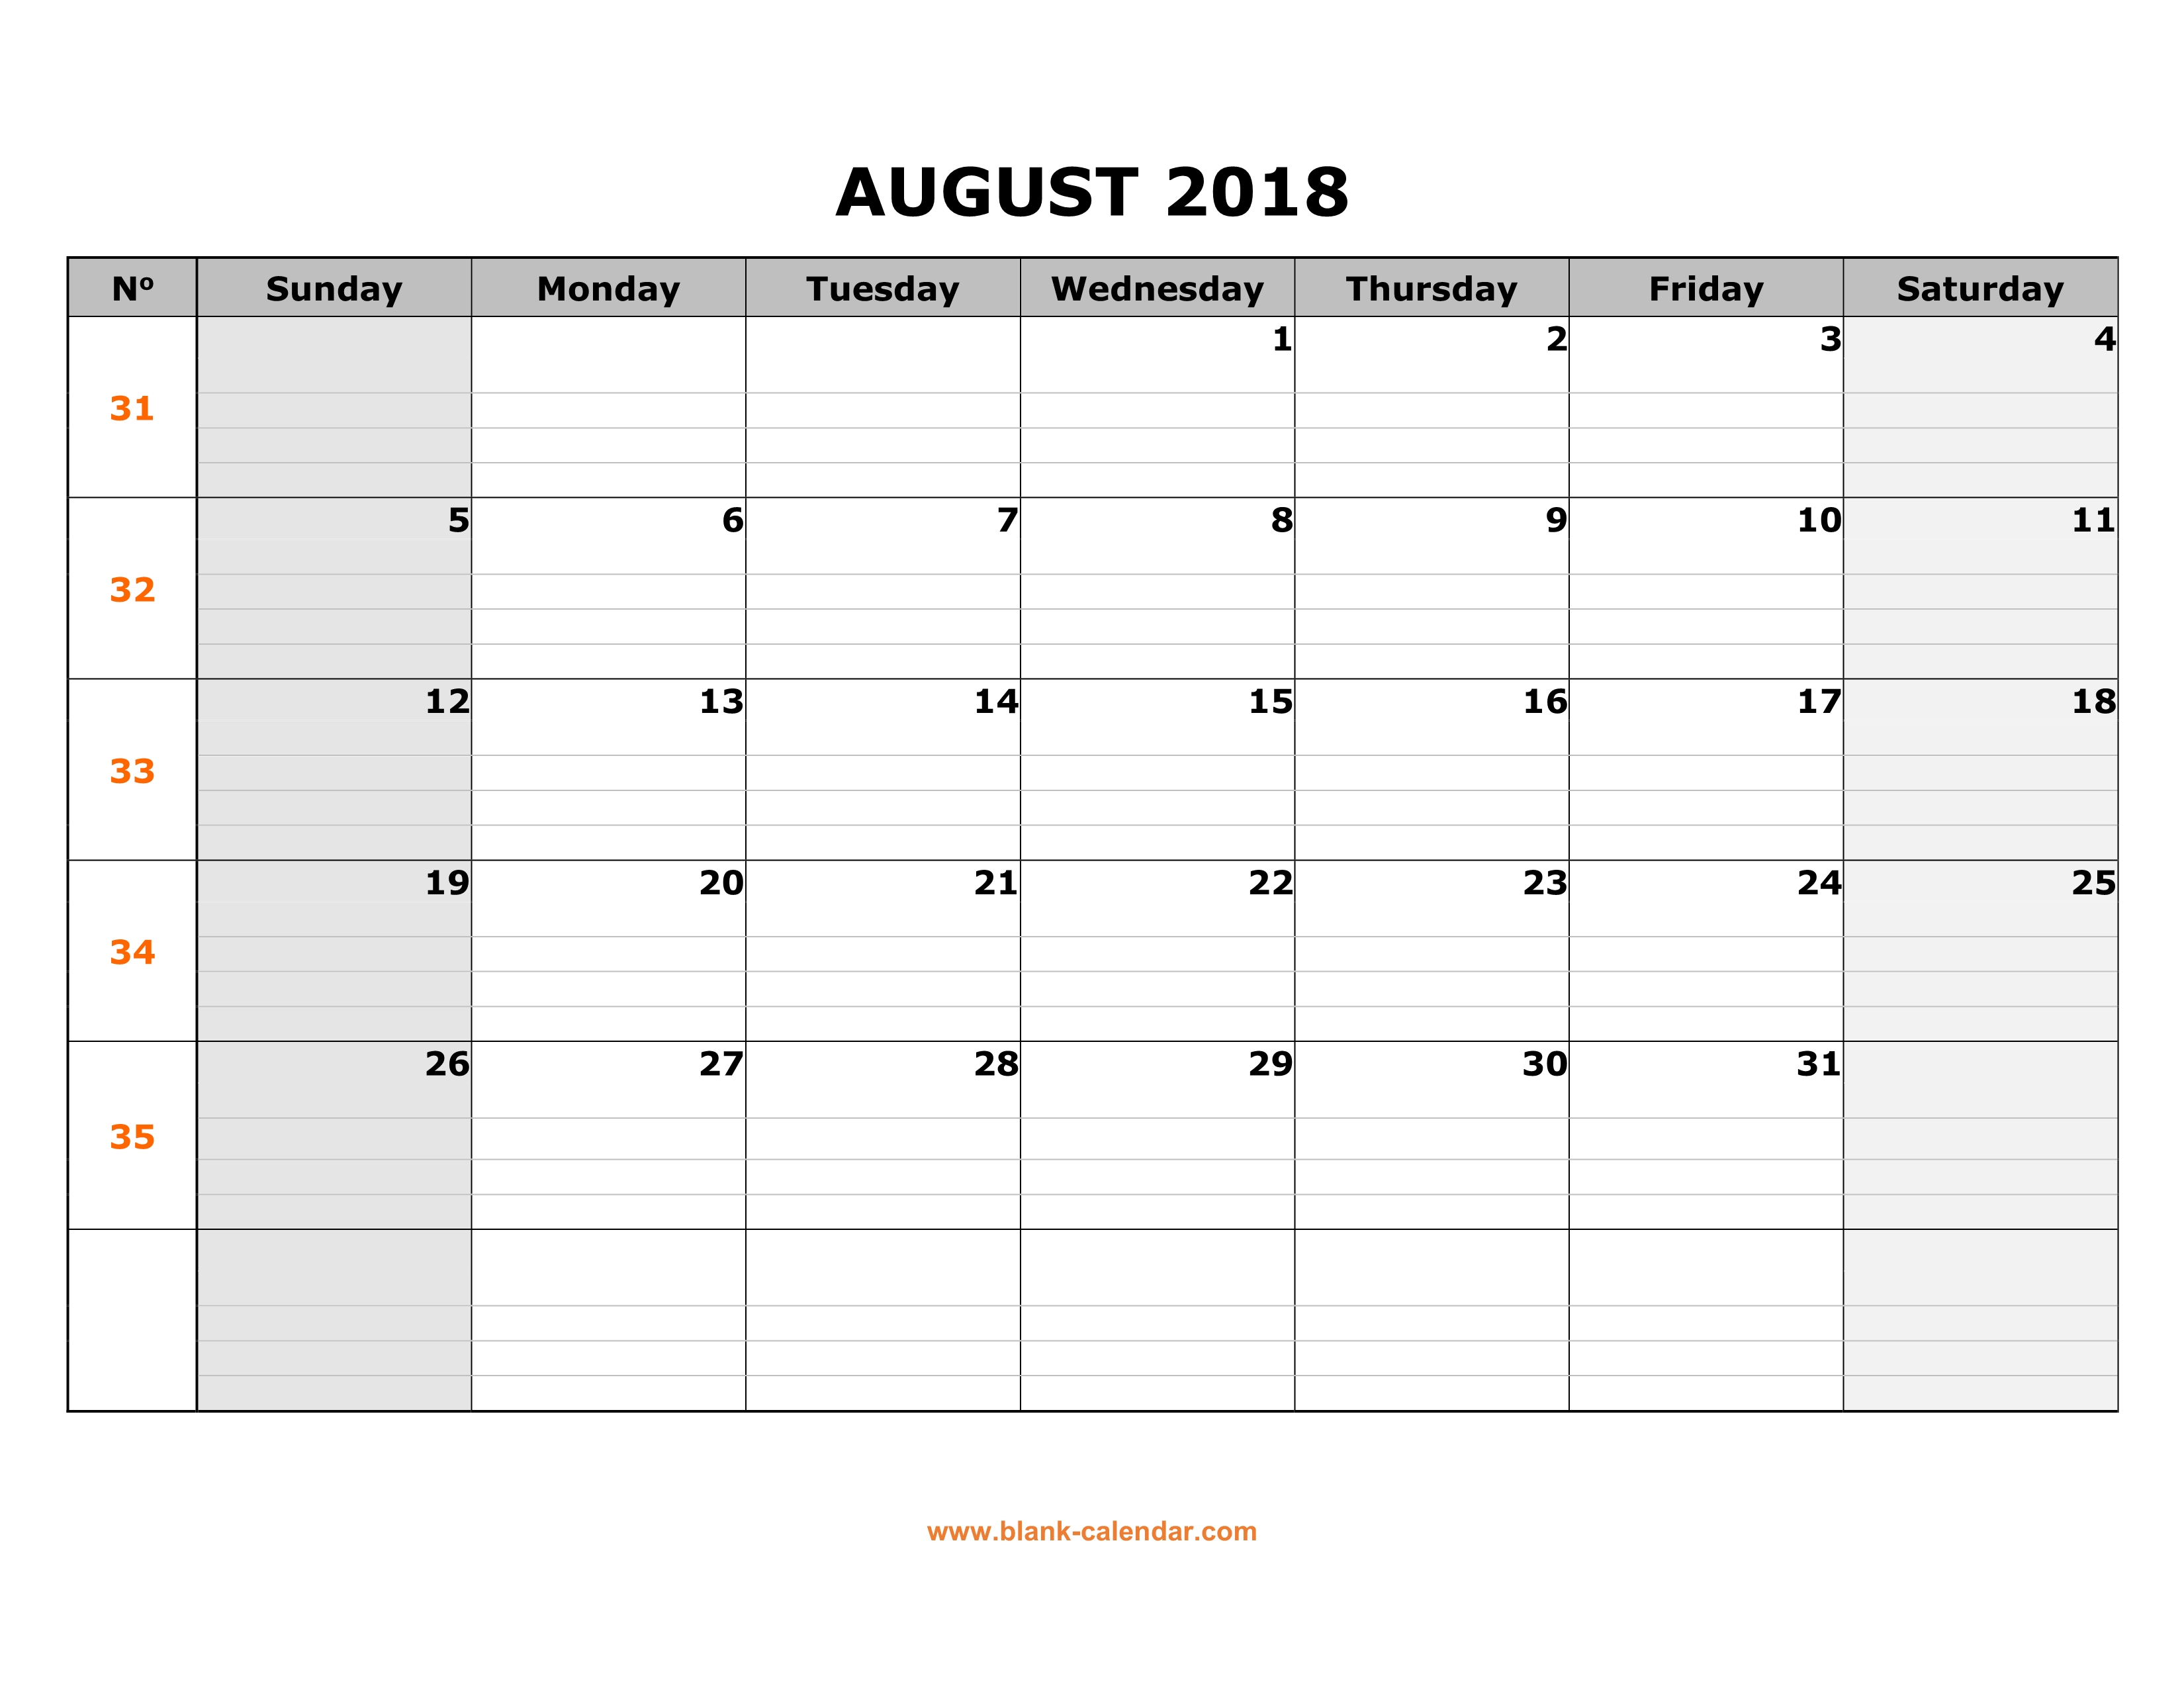 free-download-printable-august-2018-calendar-large-box-grid-space-for-notes